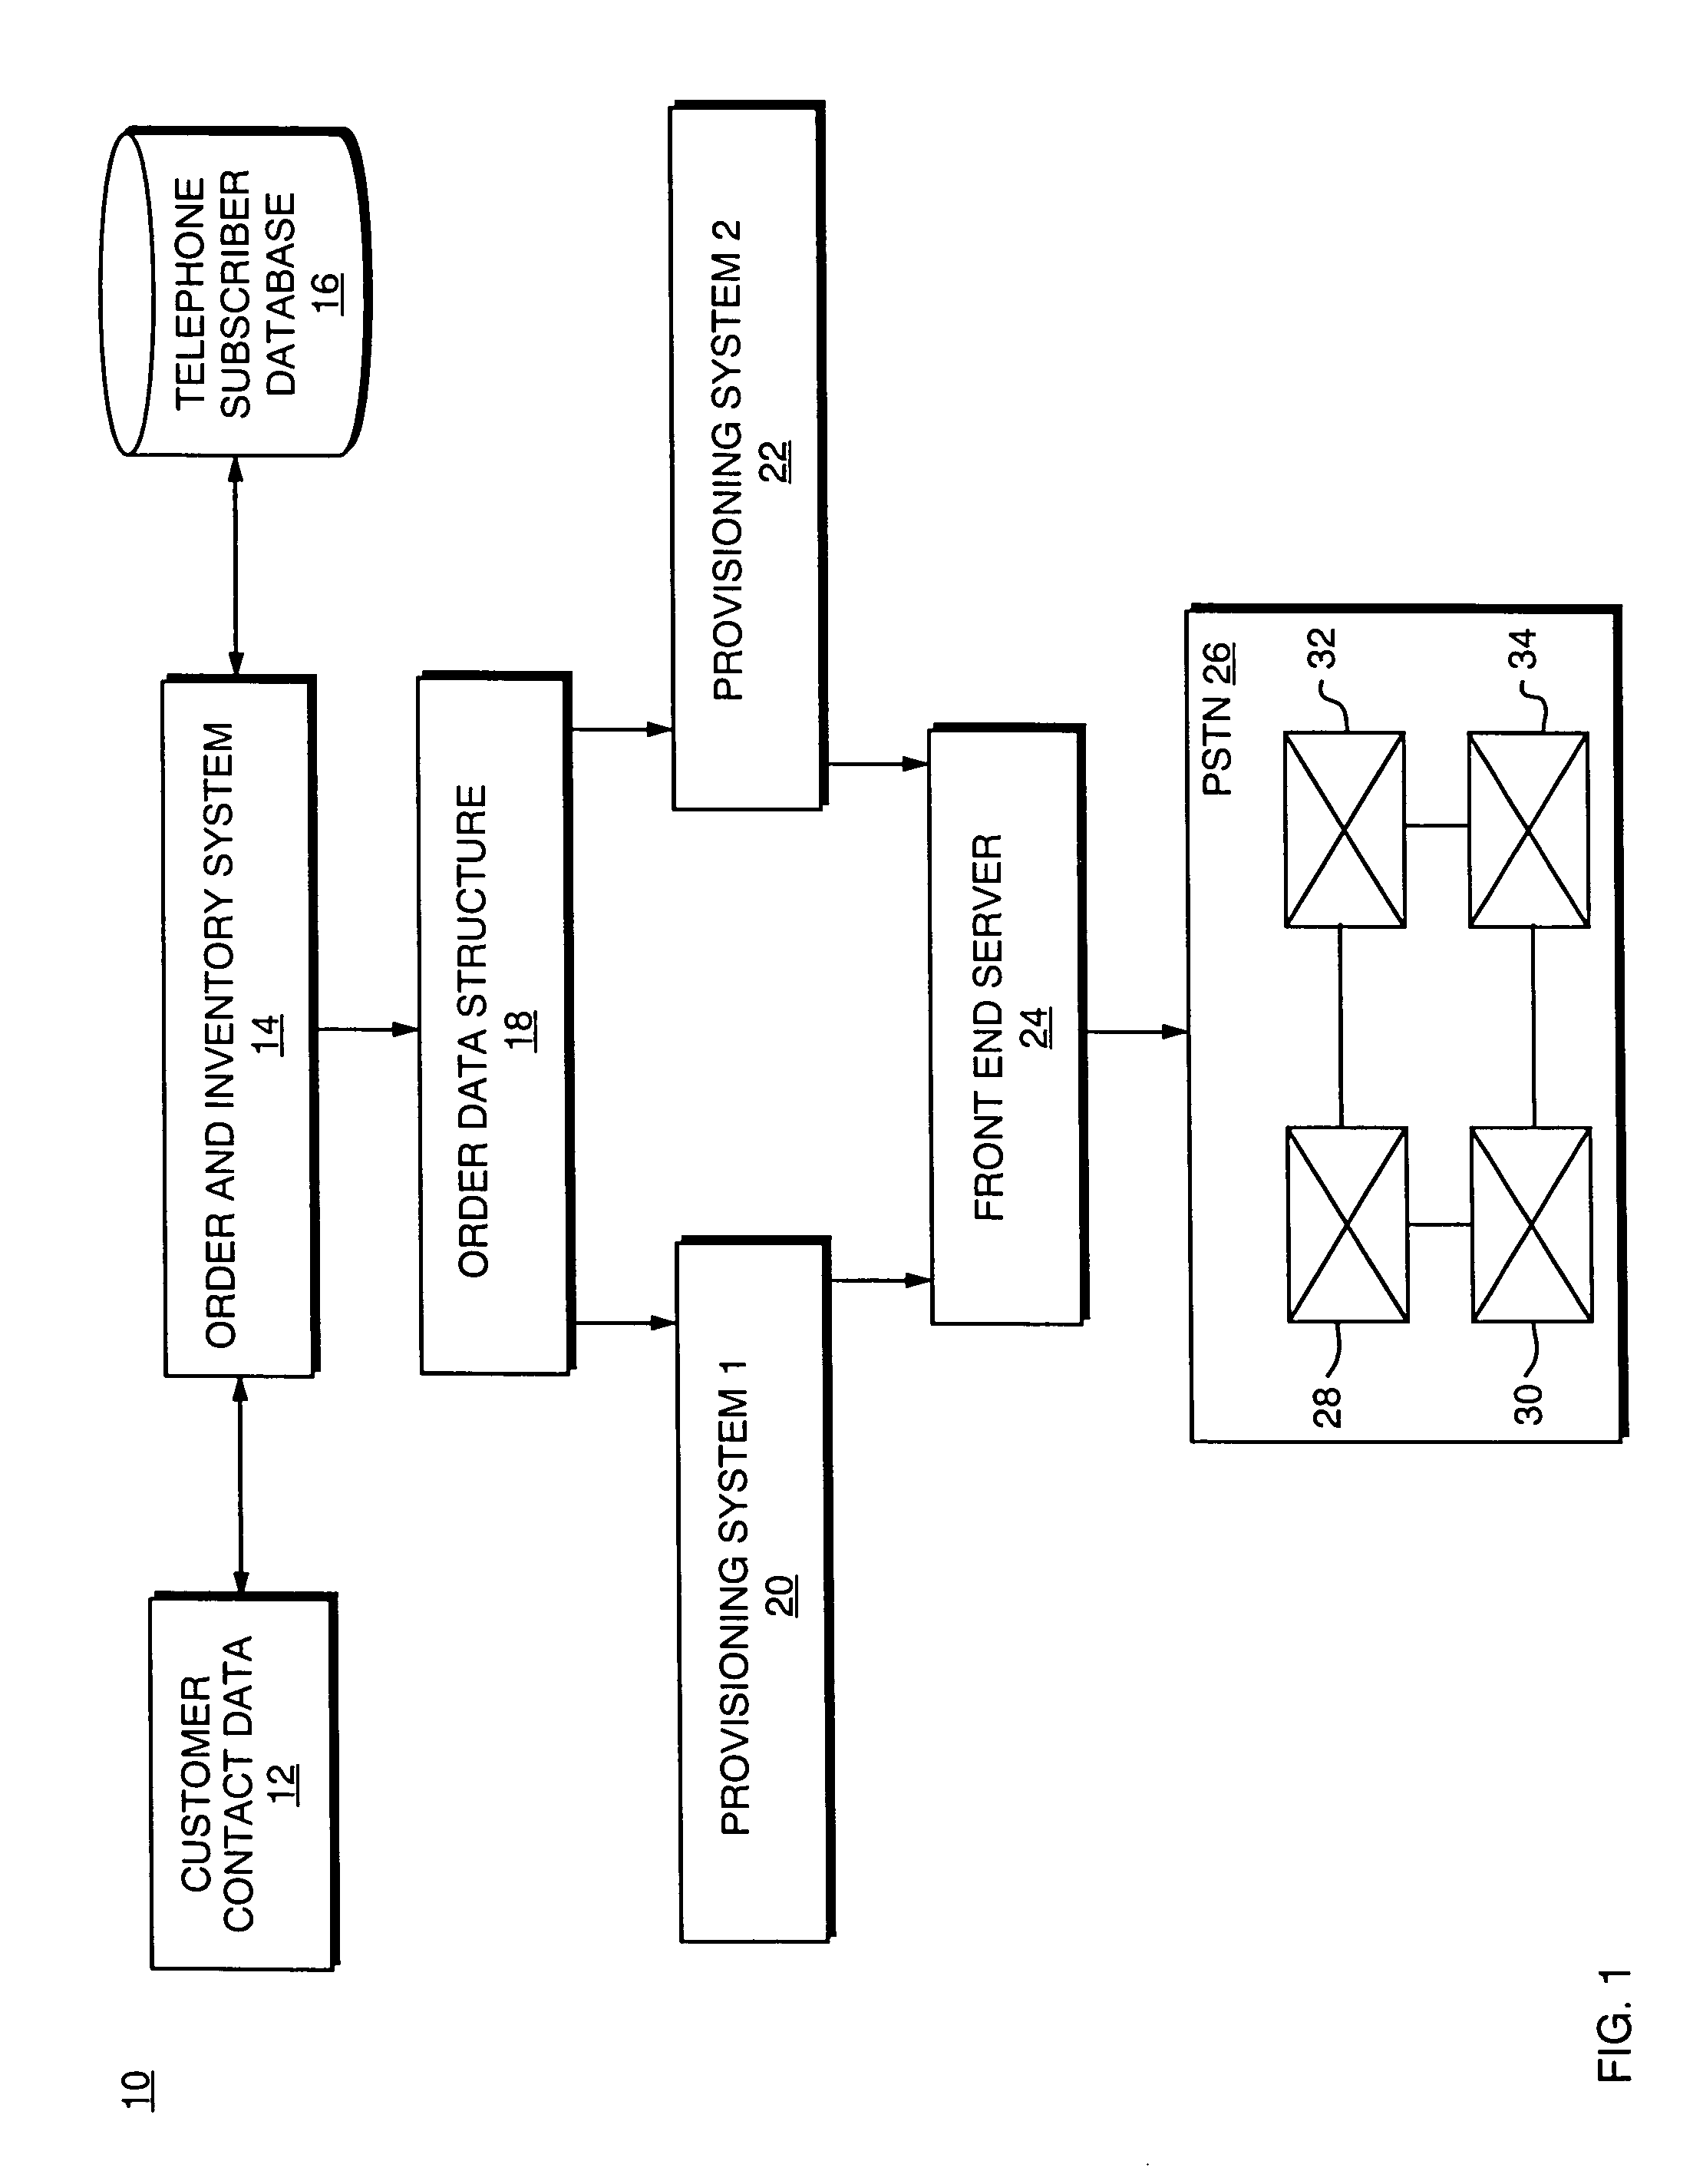 Method for analyzing the quality of telecommunications switch command tables